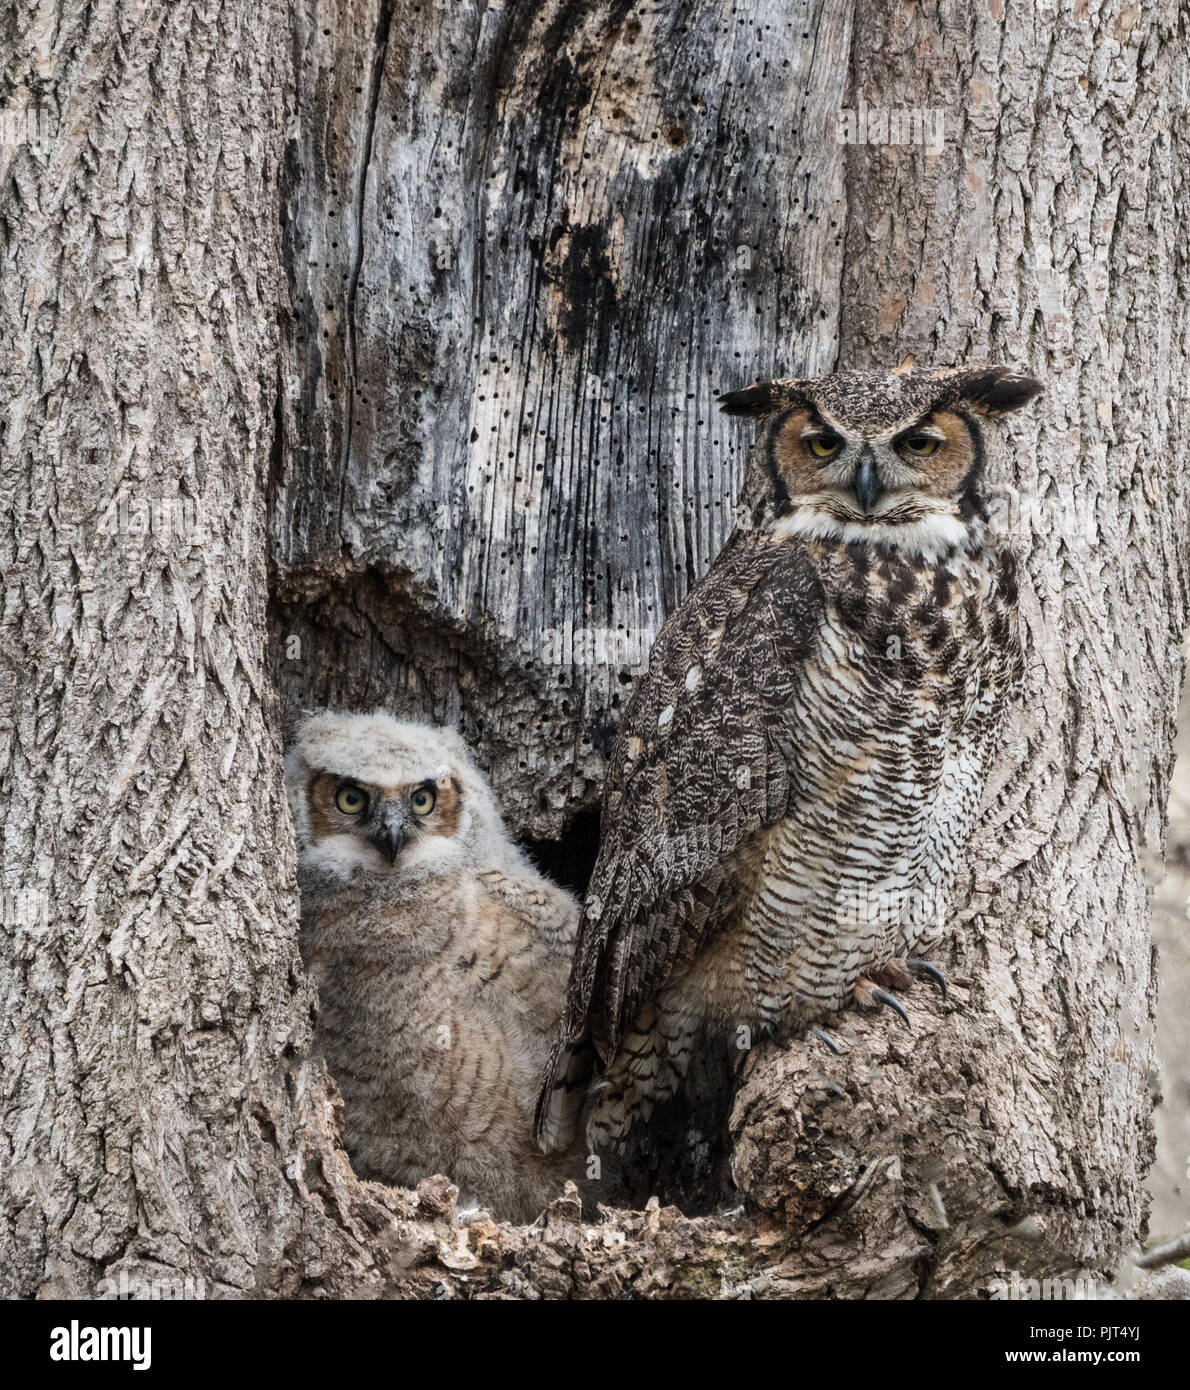 Mother great horned owl ( Bubo virginianus) watches over her young owlet as they sit in hollow of tree. Stock Photo